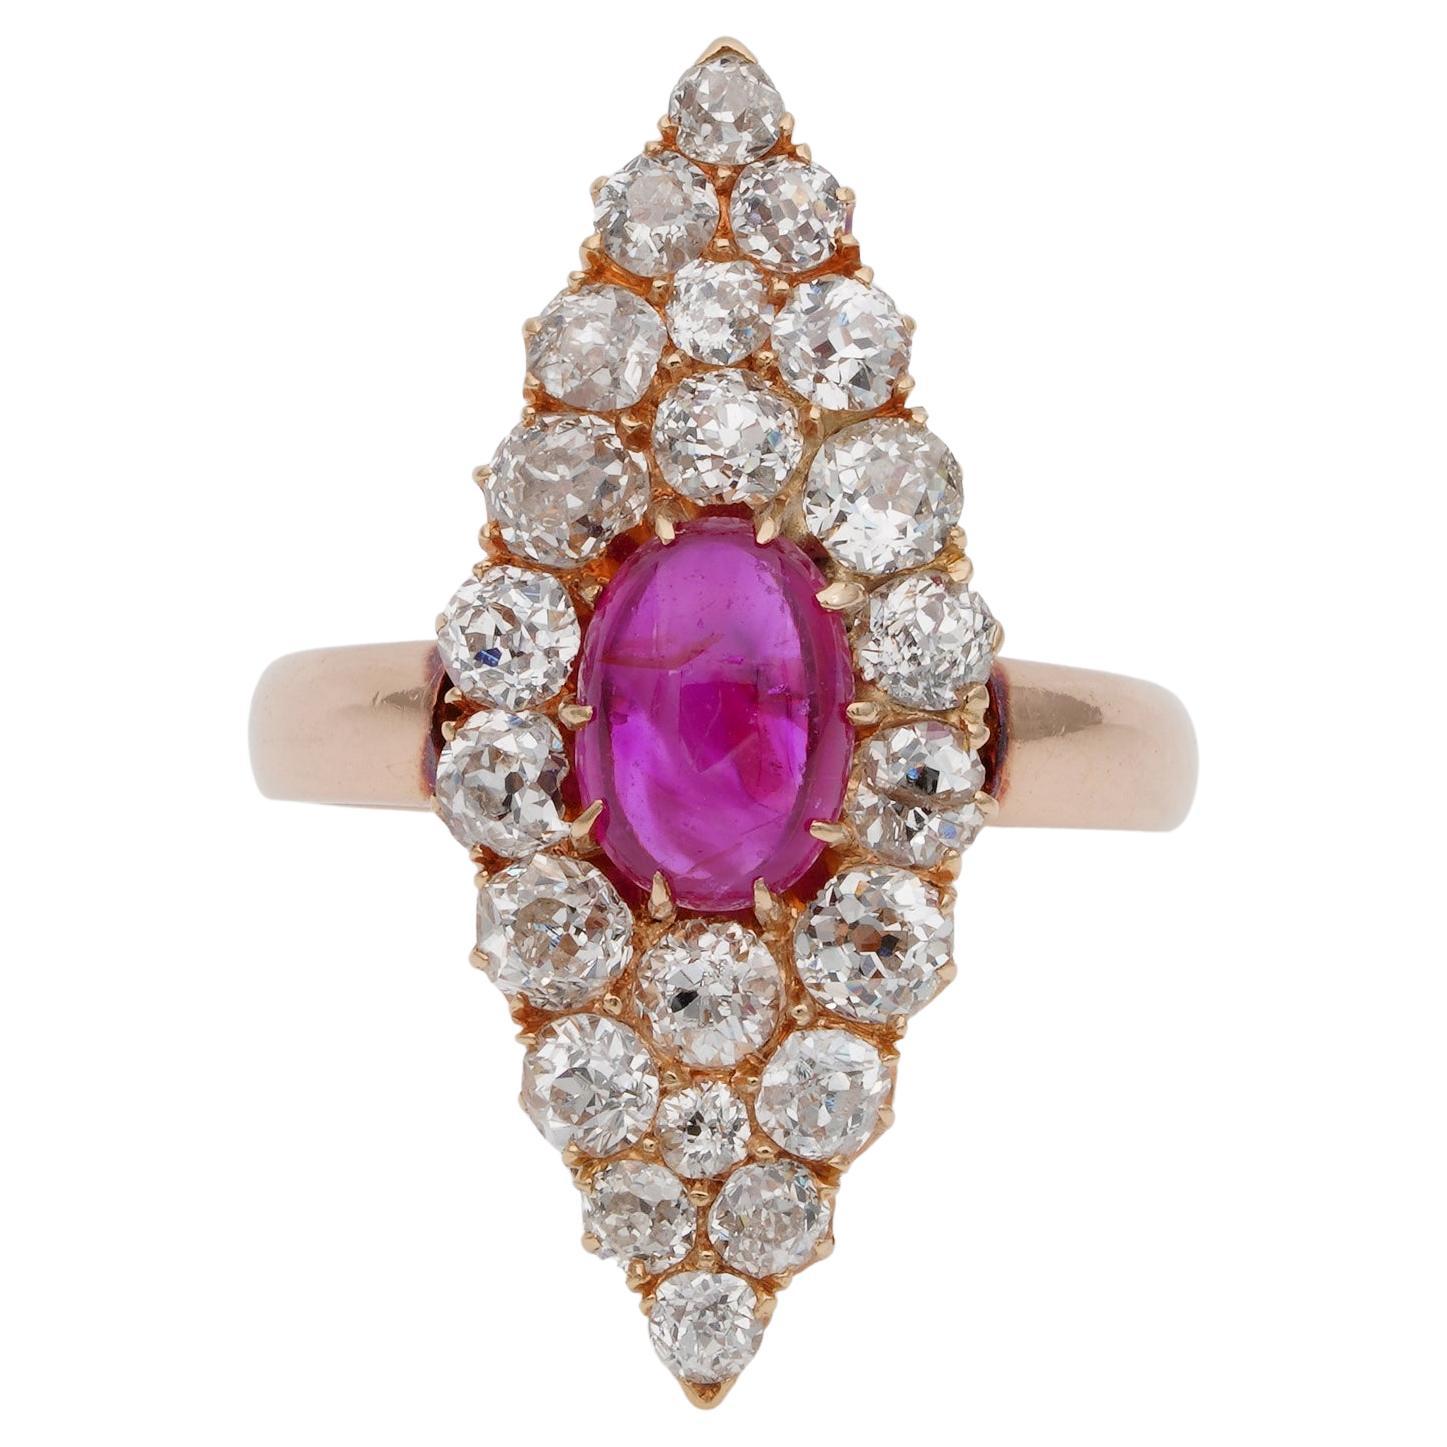 How can I spot a real Burma ruby?